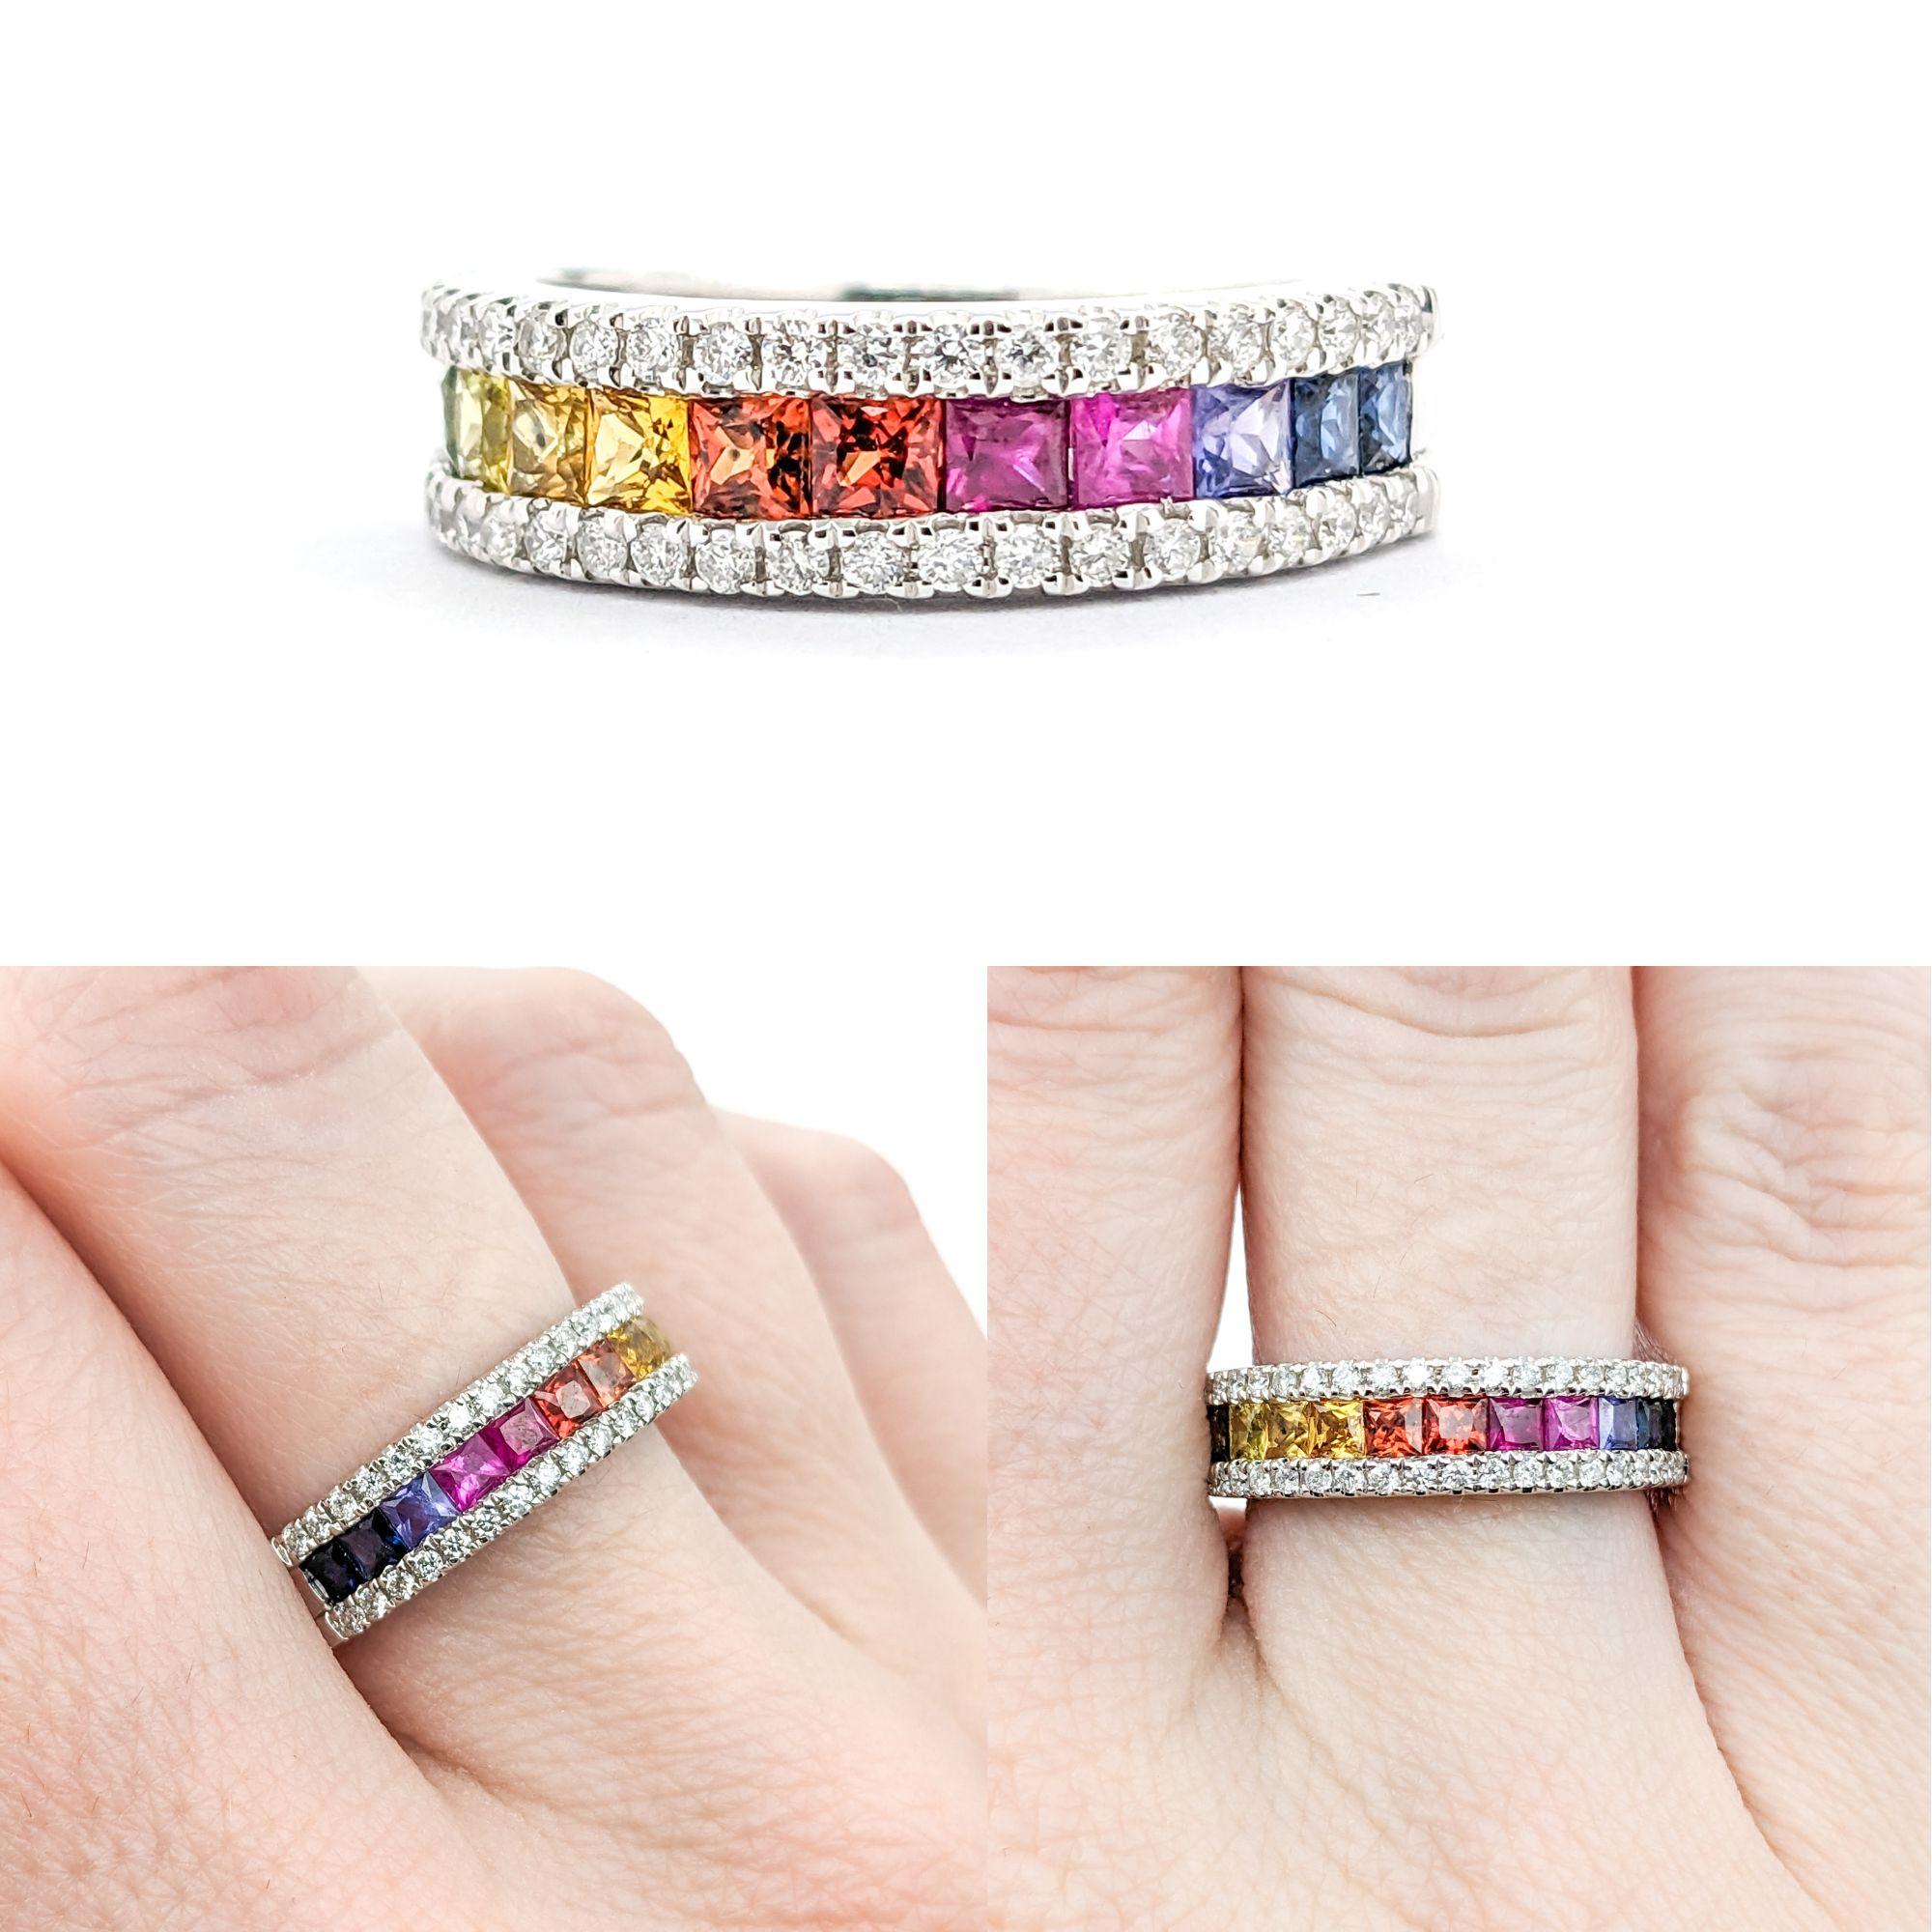 Multicolor Sapphire & Diamond Rainbow Band Ring in White Gold

Introducing this beautiful multicolor Sapphire ring crafted in 14k white gold. The ring features a 1.26ctw Multi-Color Sapphire Row Flanked by .33ctw glittering Round Diamonds. The